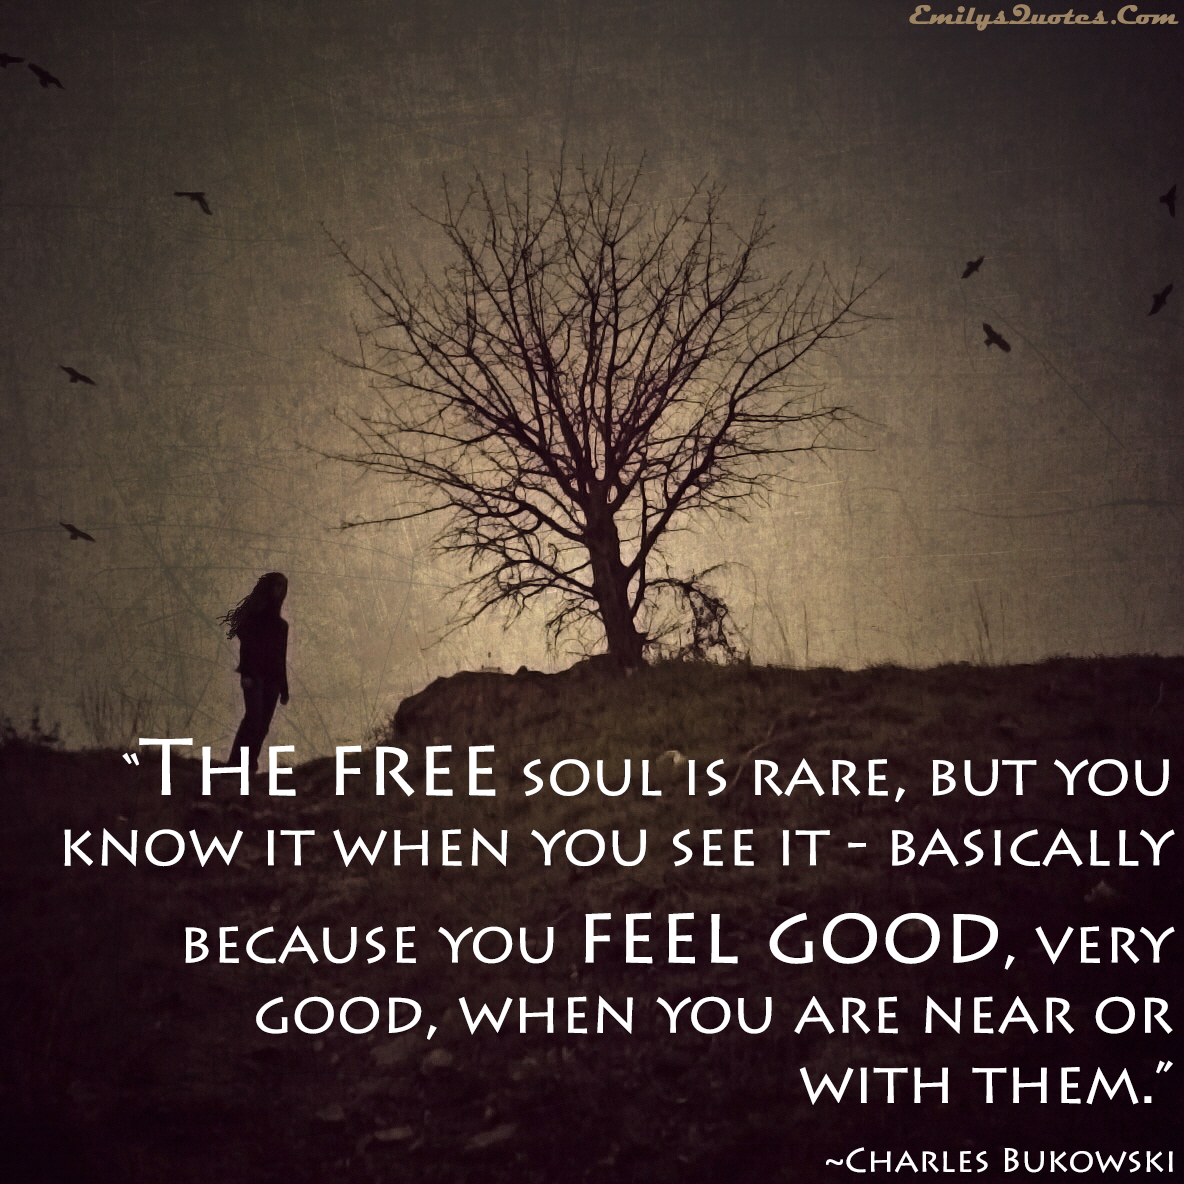 The free soul is rare, but you know it when you see it – basically because you feel good, very good